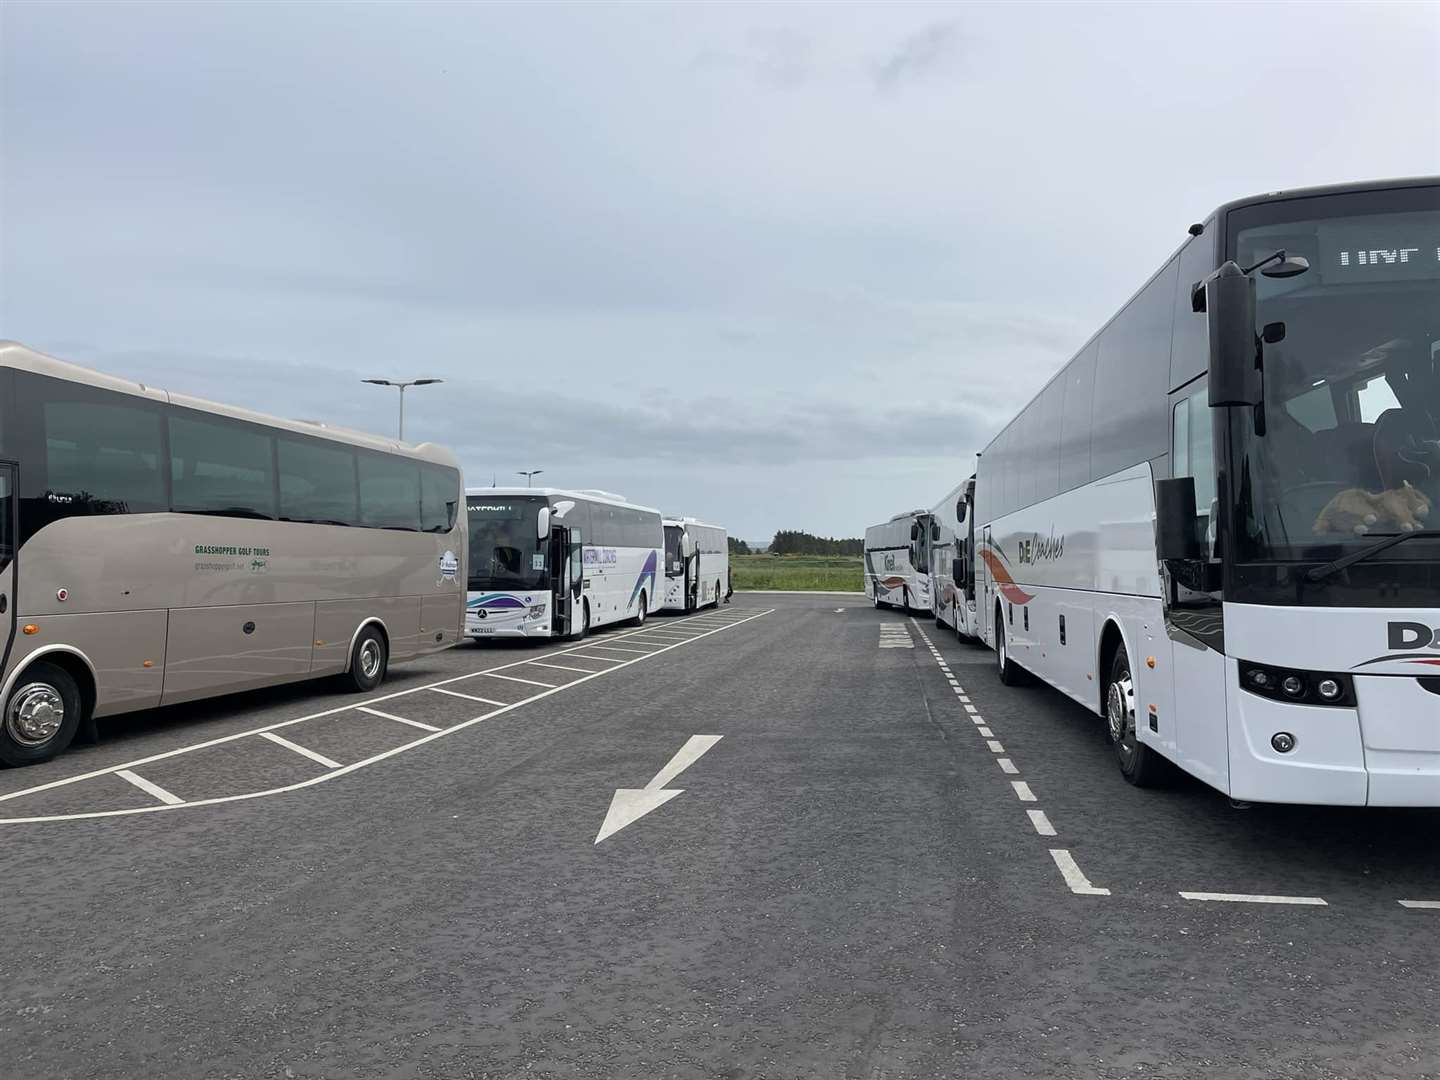 Coaches lined up at Dornoch South Vehicle Park.